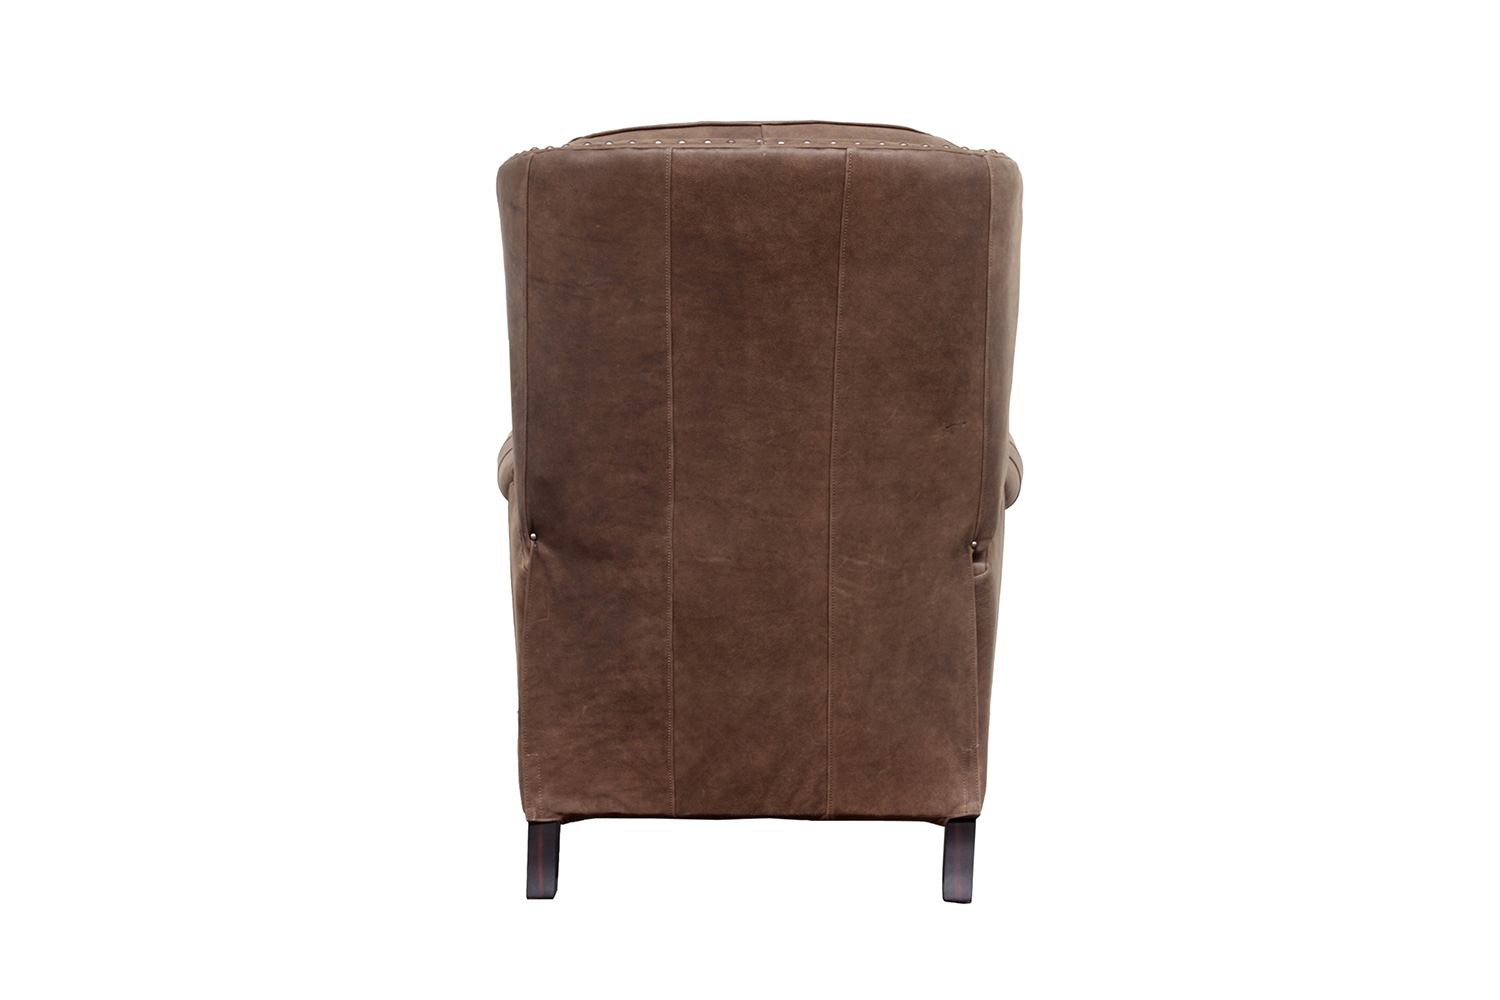 Barcalounger KendAll Recliner Chair - Sanded Dark Bomber/Top Grain Leather